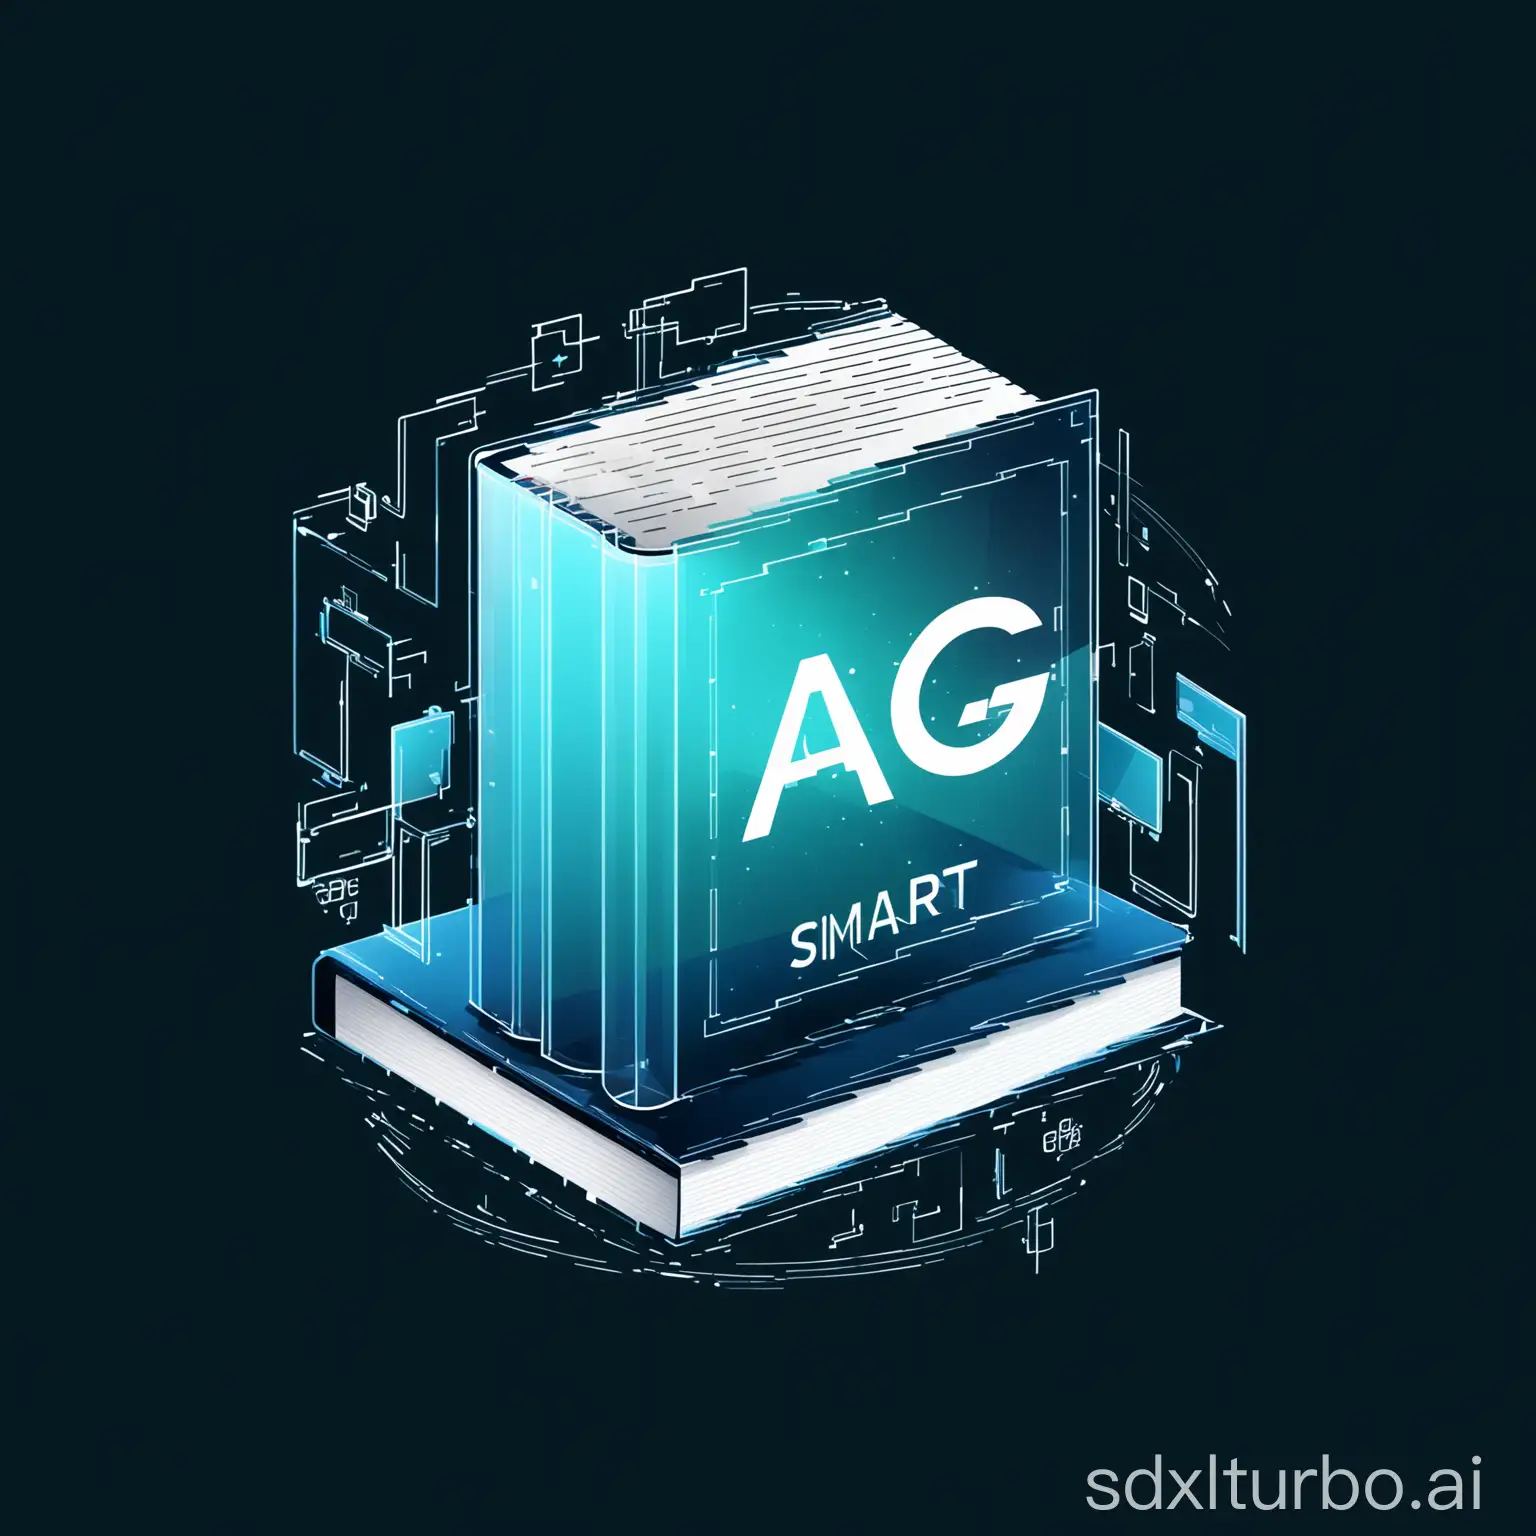 Create an AIGC Smart Publishing Lab logo with a futuristic feel: a semi-transparent book at the center, with 'AIGC' letters on it. Transparent background, simple and clear lines and shapes as main elements, easily recognizable and visually striking. Extremely simplified